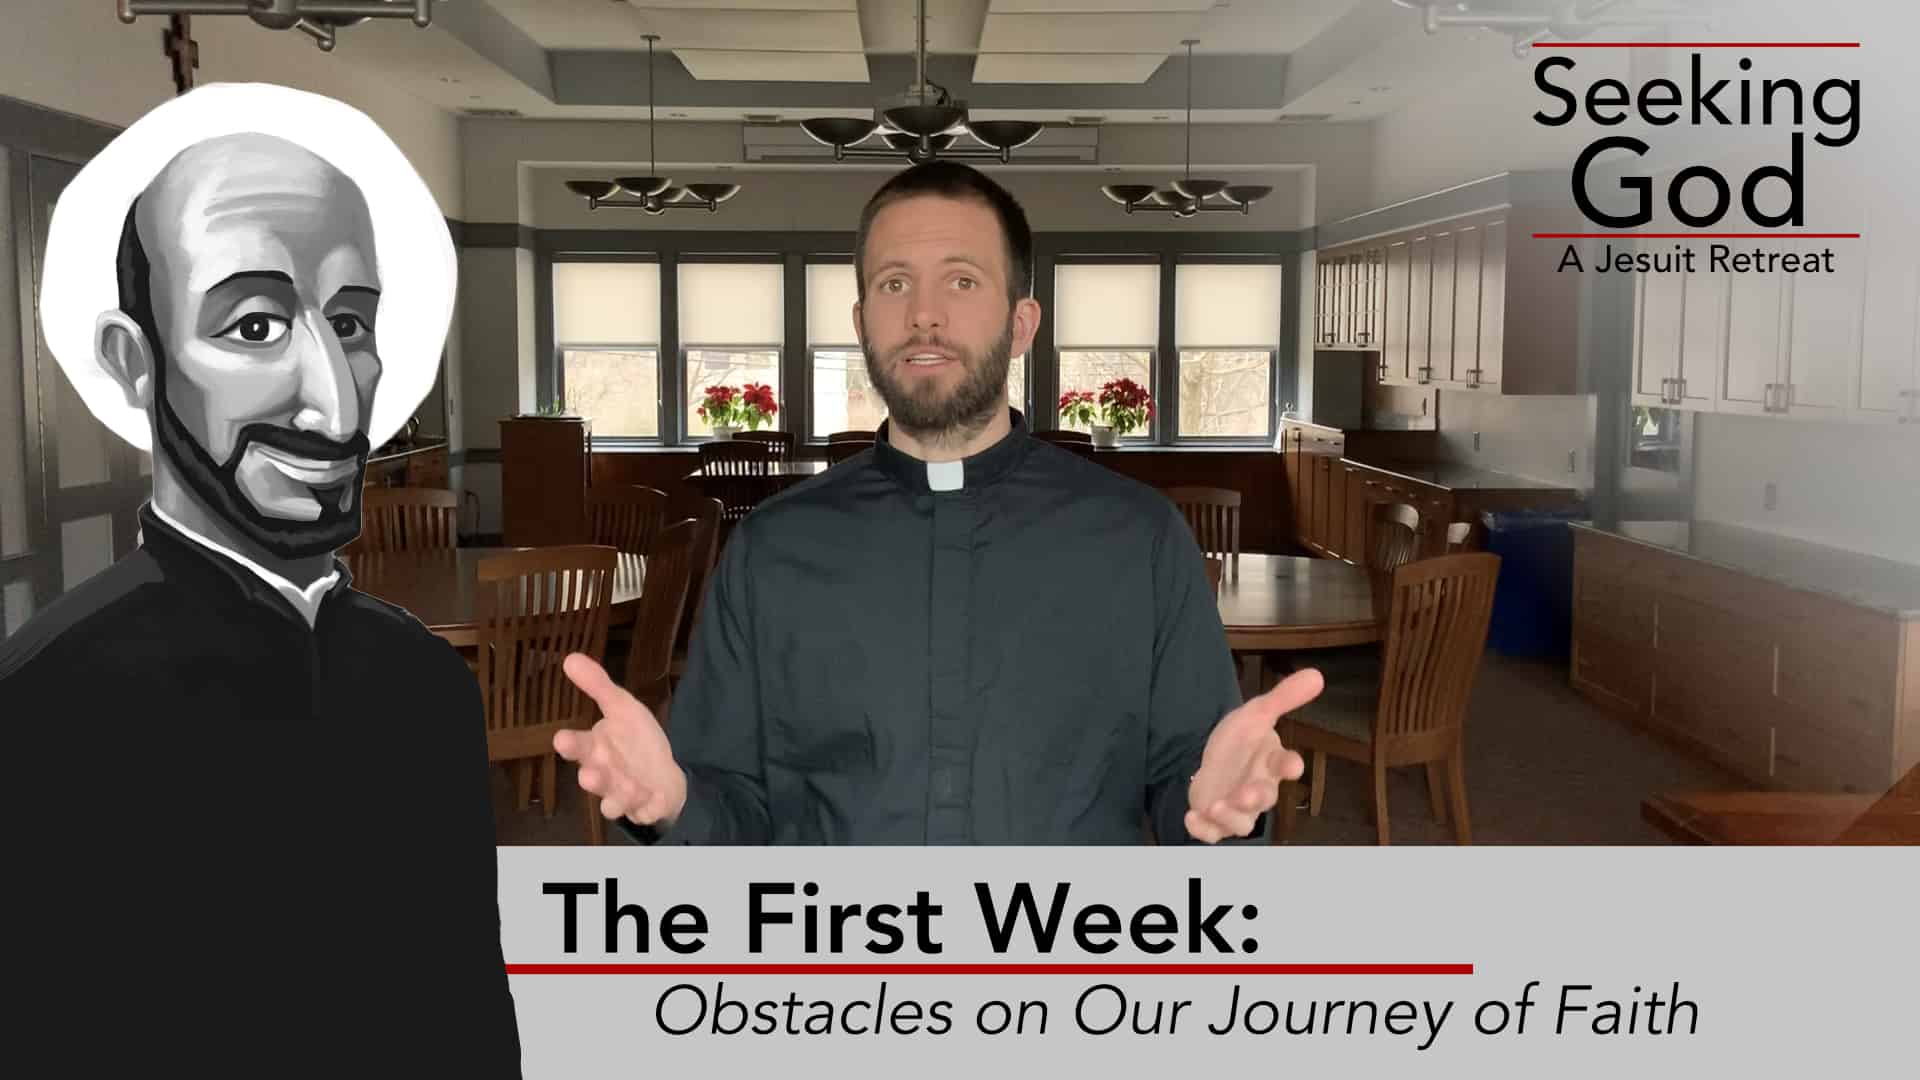 The First Week: Obstacles on Our Journey of Faith | Seeking God: A Jesuit Retreat